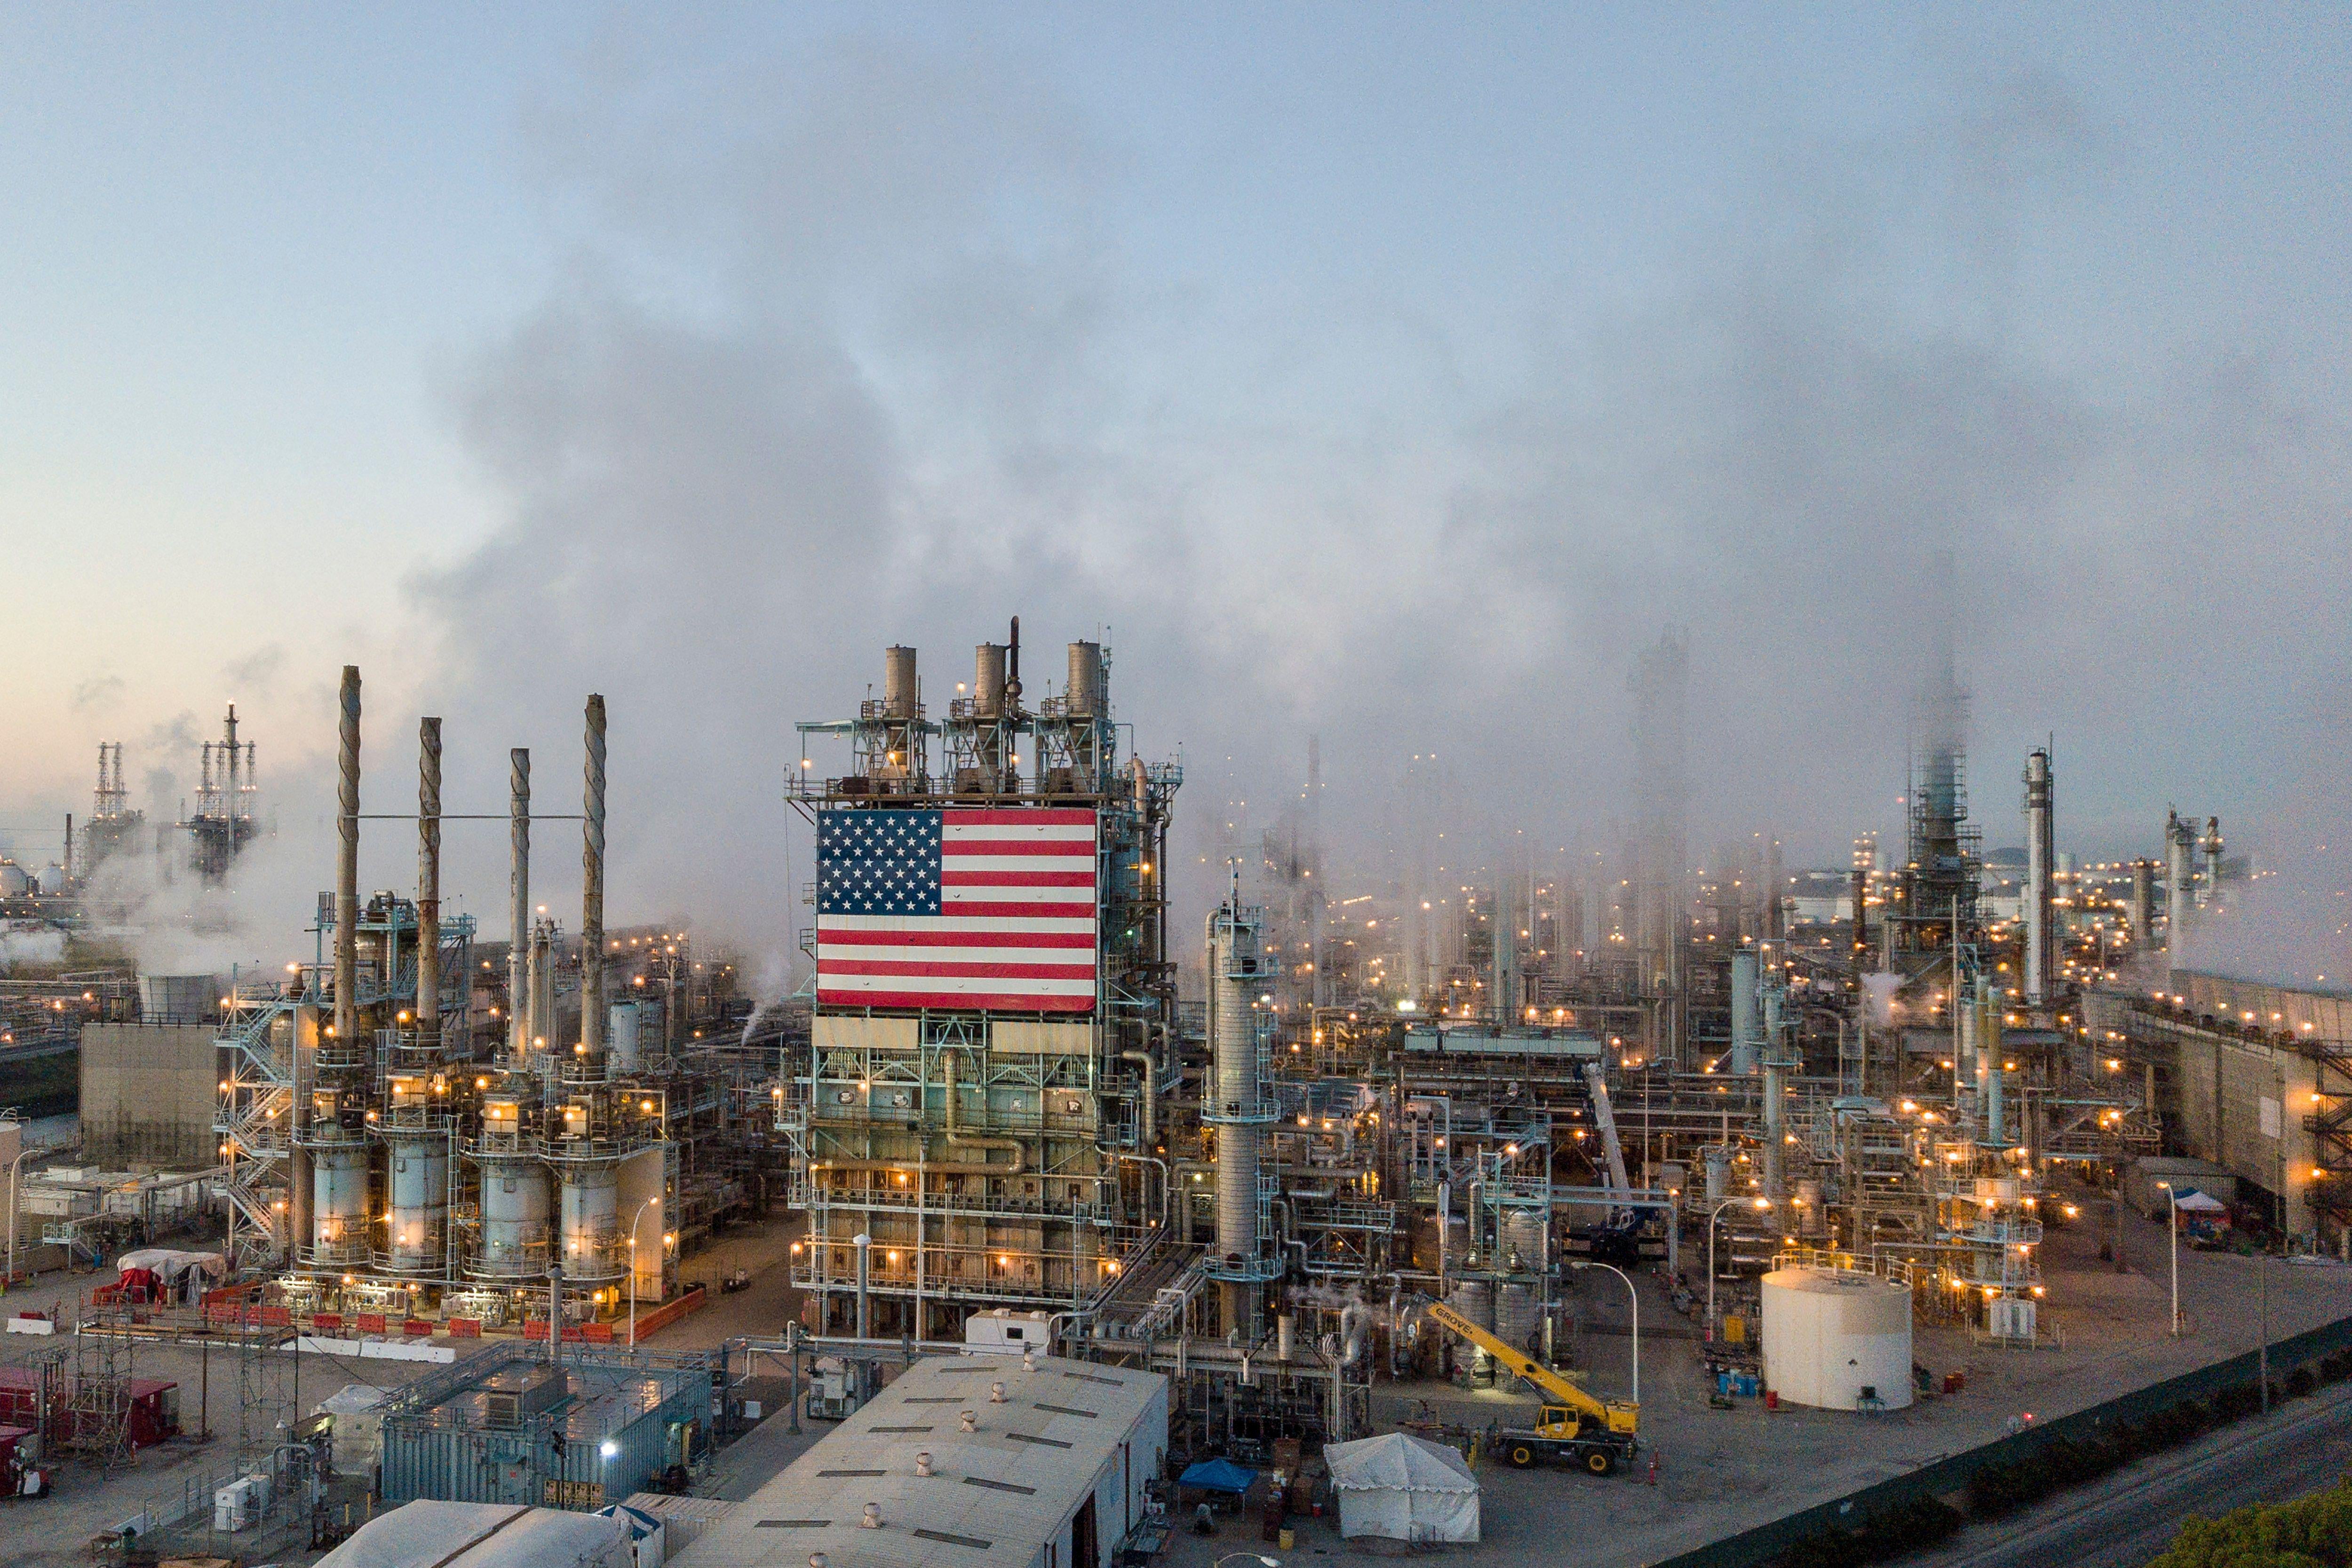 An oil refinery with an American flag is seen spewing smoke.